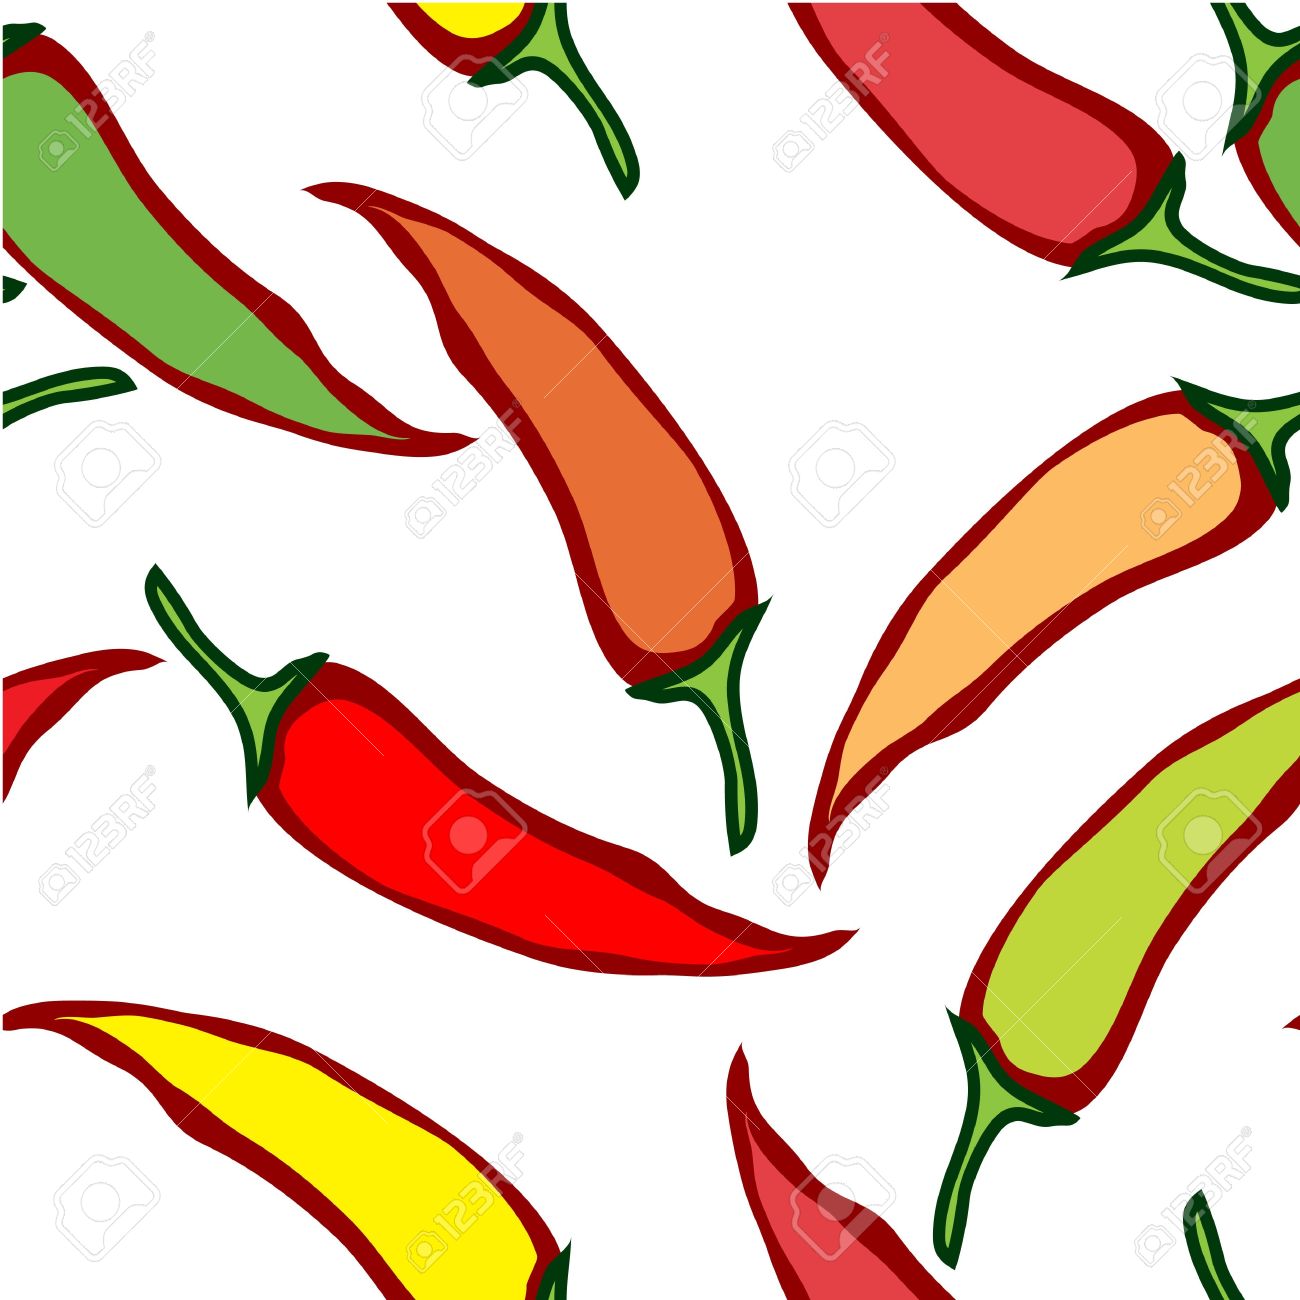 Seamless Chili Pepper Wallpaper On White Royalty Cliparts